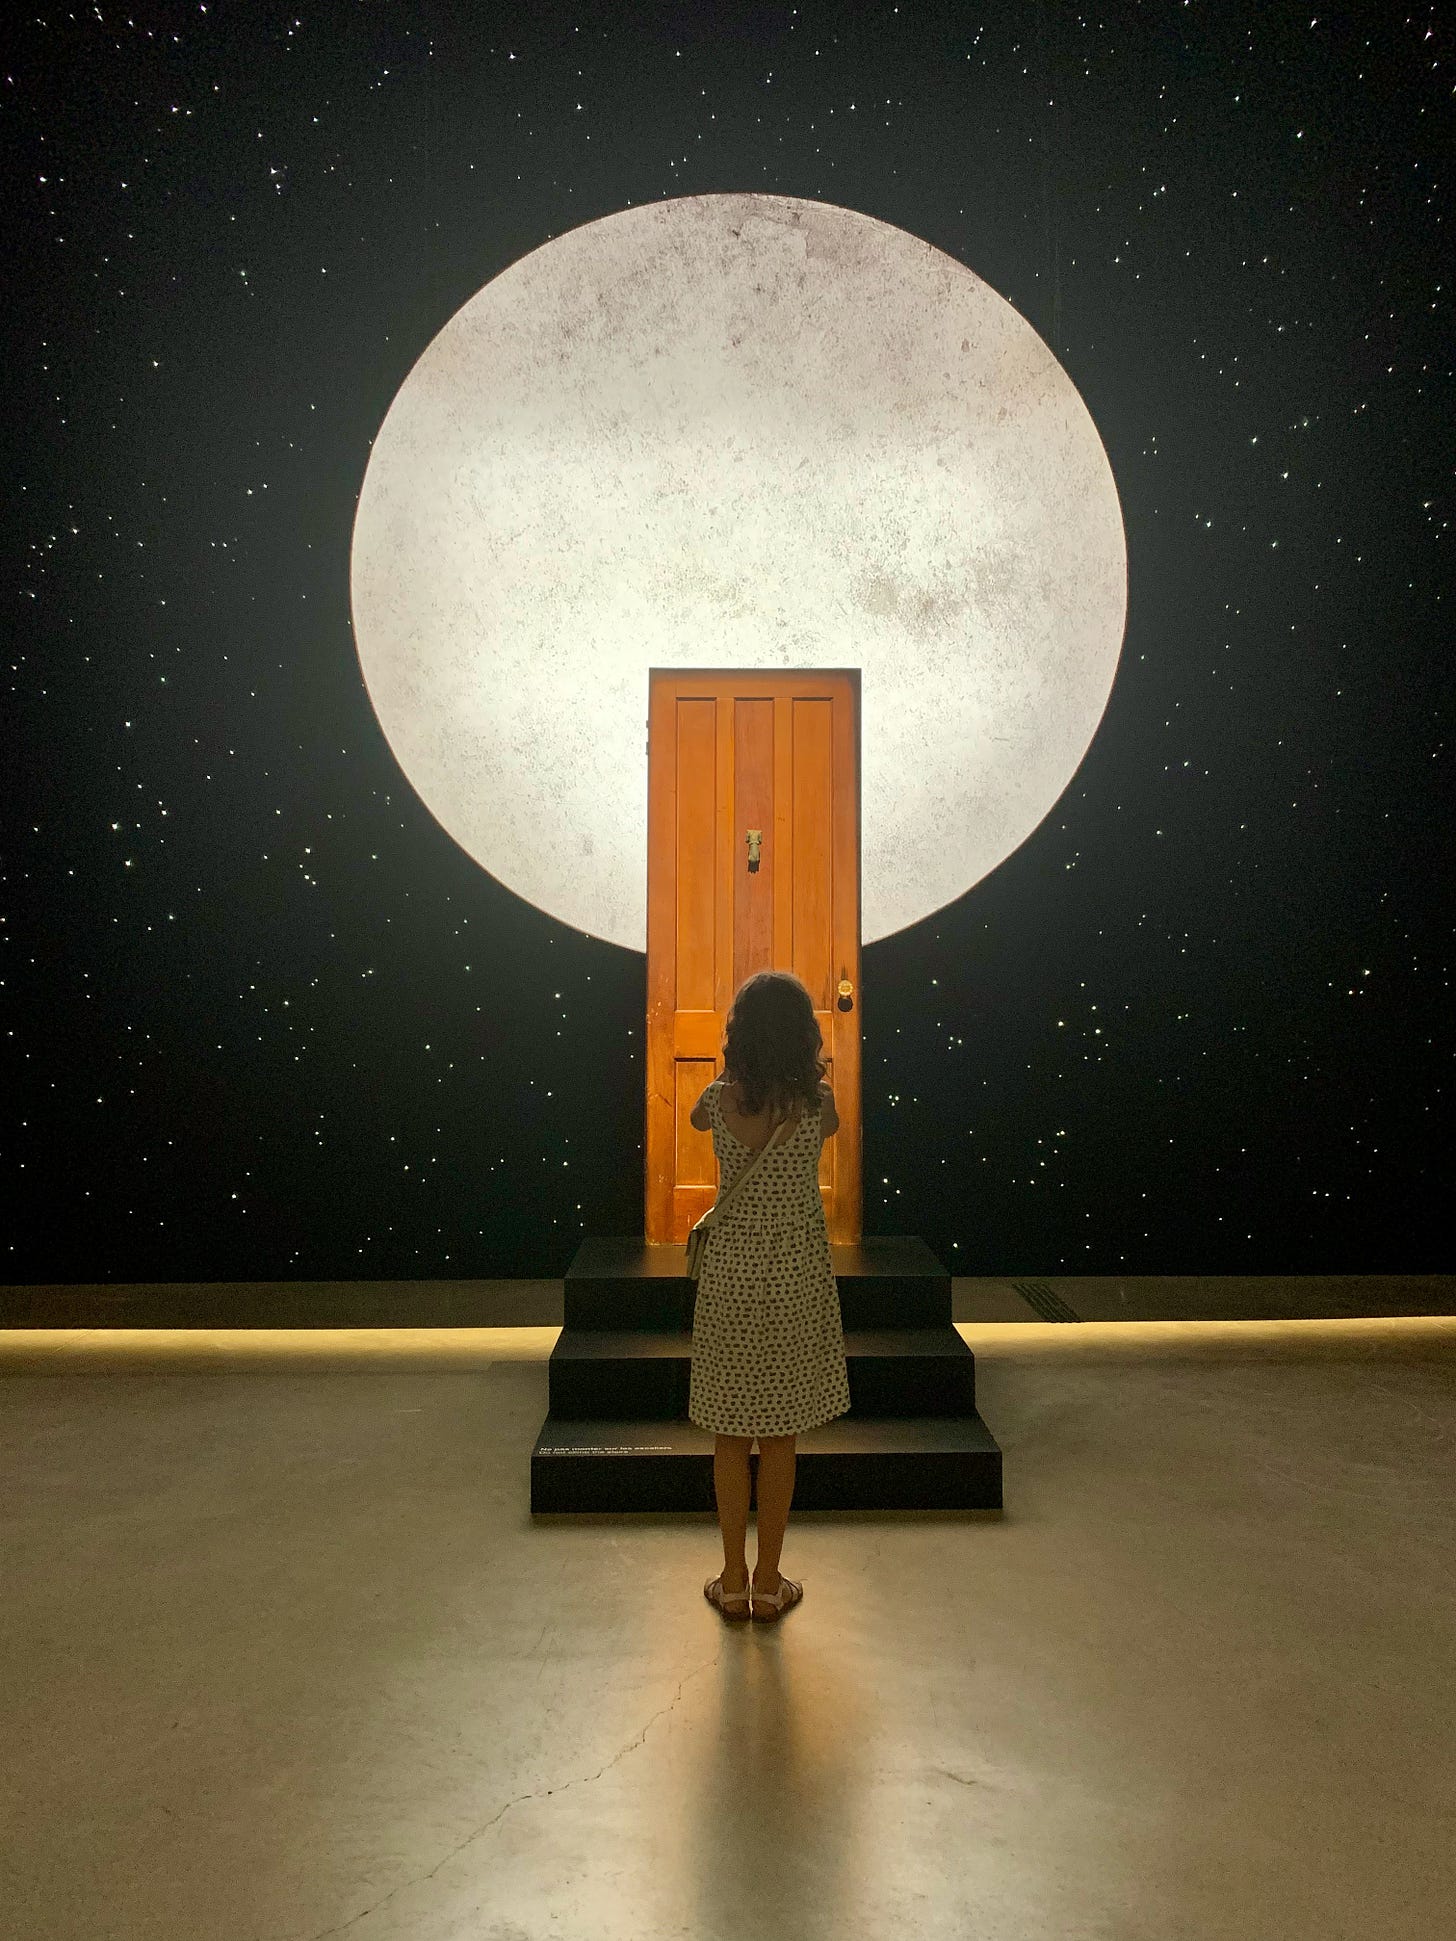 A girl stands in front of a brown door, behind the door is an image of a moon, behind the moon is a starry sky.